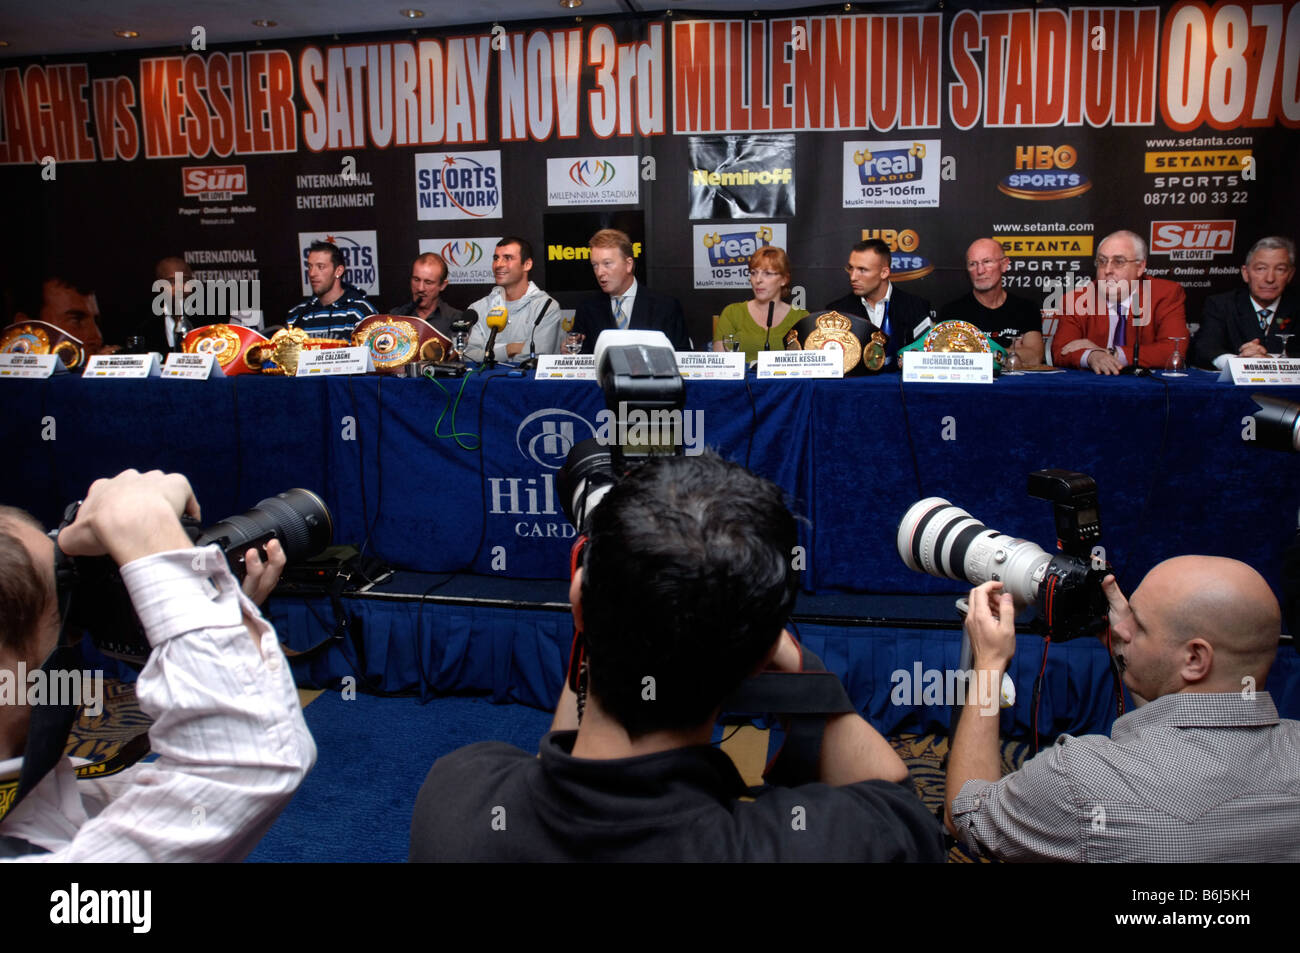 PRESS PHOTOGRAPHERS AT A PRESS CONFERENCE IN THE CARDIFF HILTON BEFORE THE MATCH BETWEEN JOE CALZAGHE AND MIKEL KESSLER UK 2007 Stock Photo